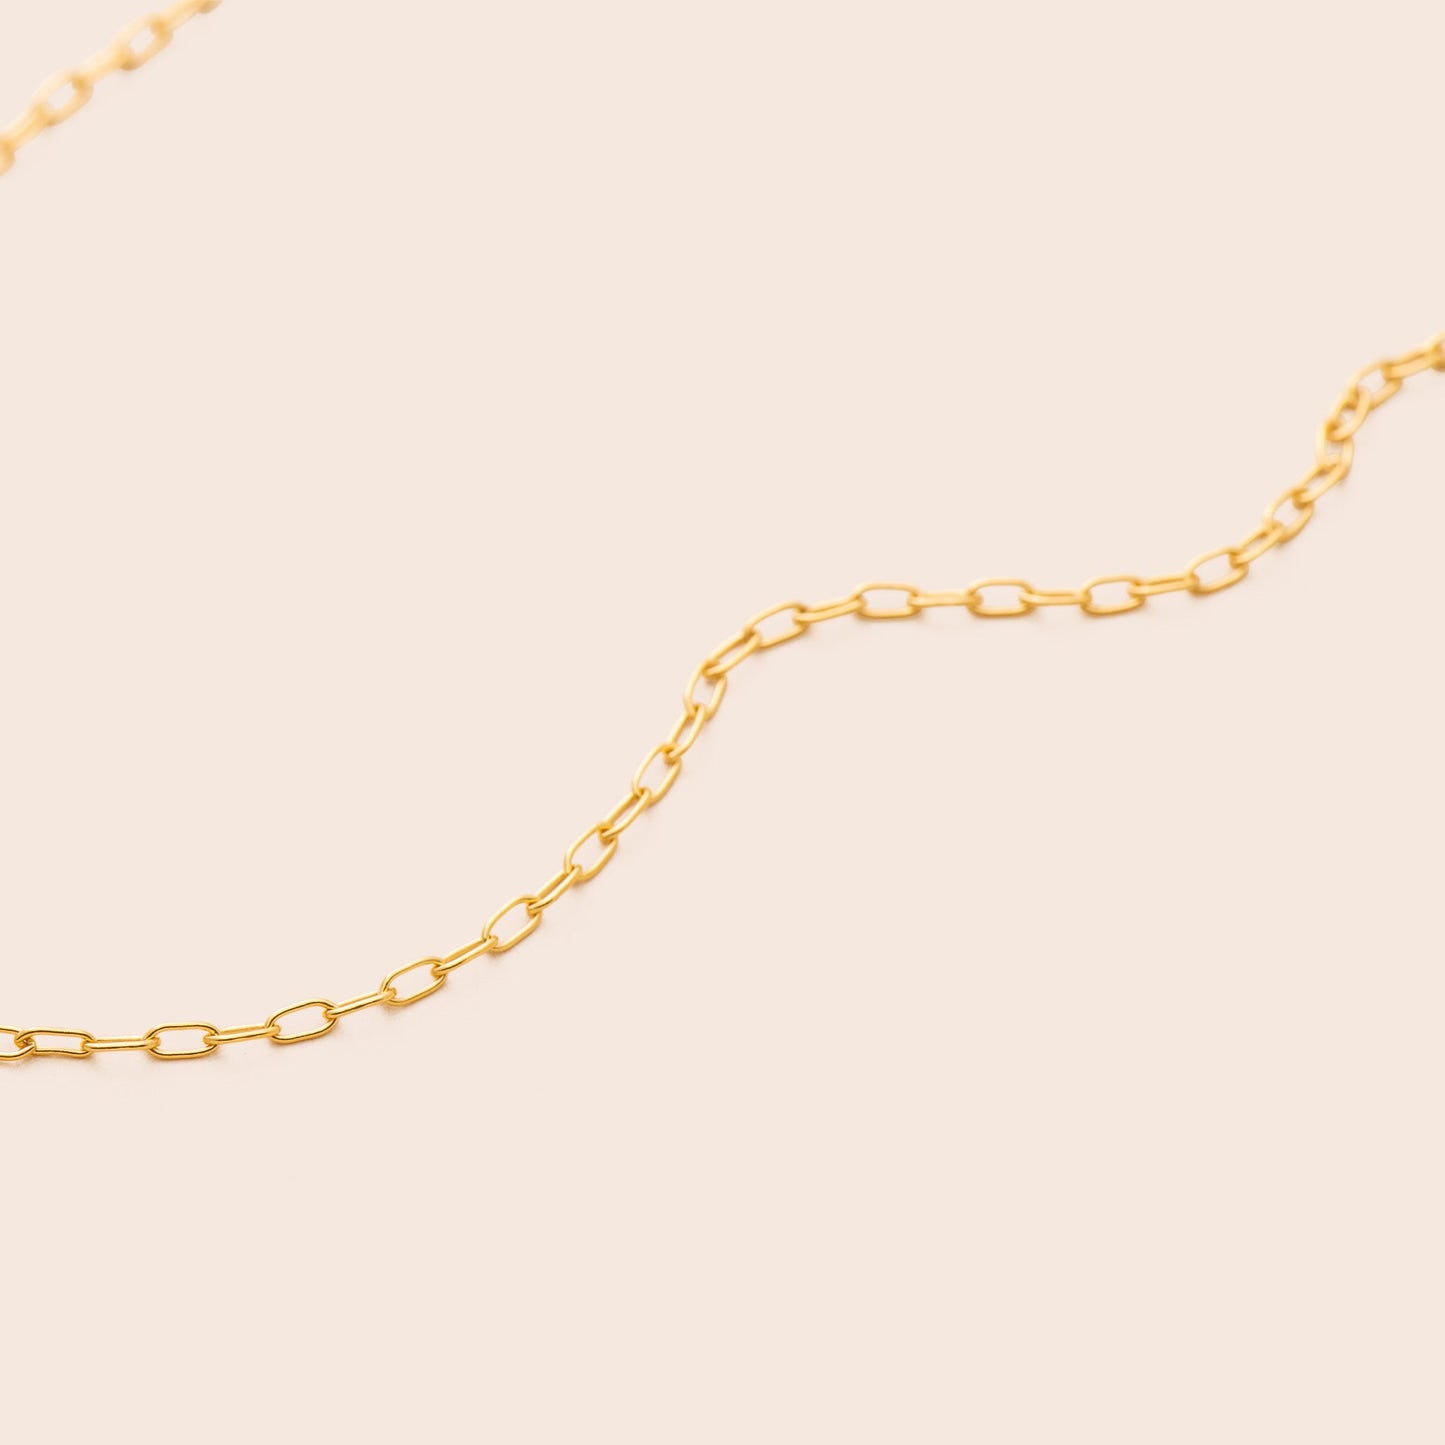 3 Row Snake Chain Lady Women Girl Gold Plated Necklace Thick ...